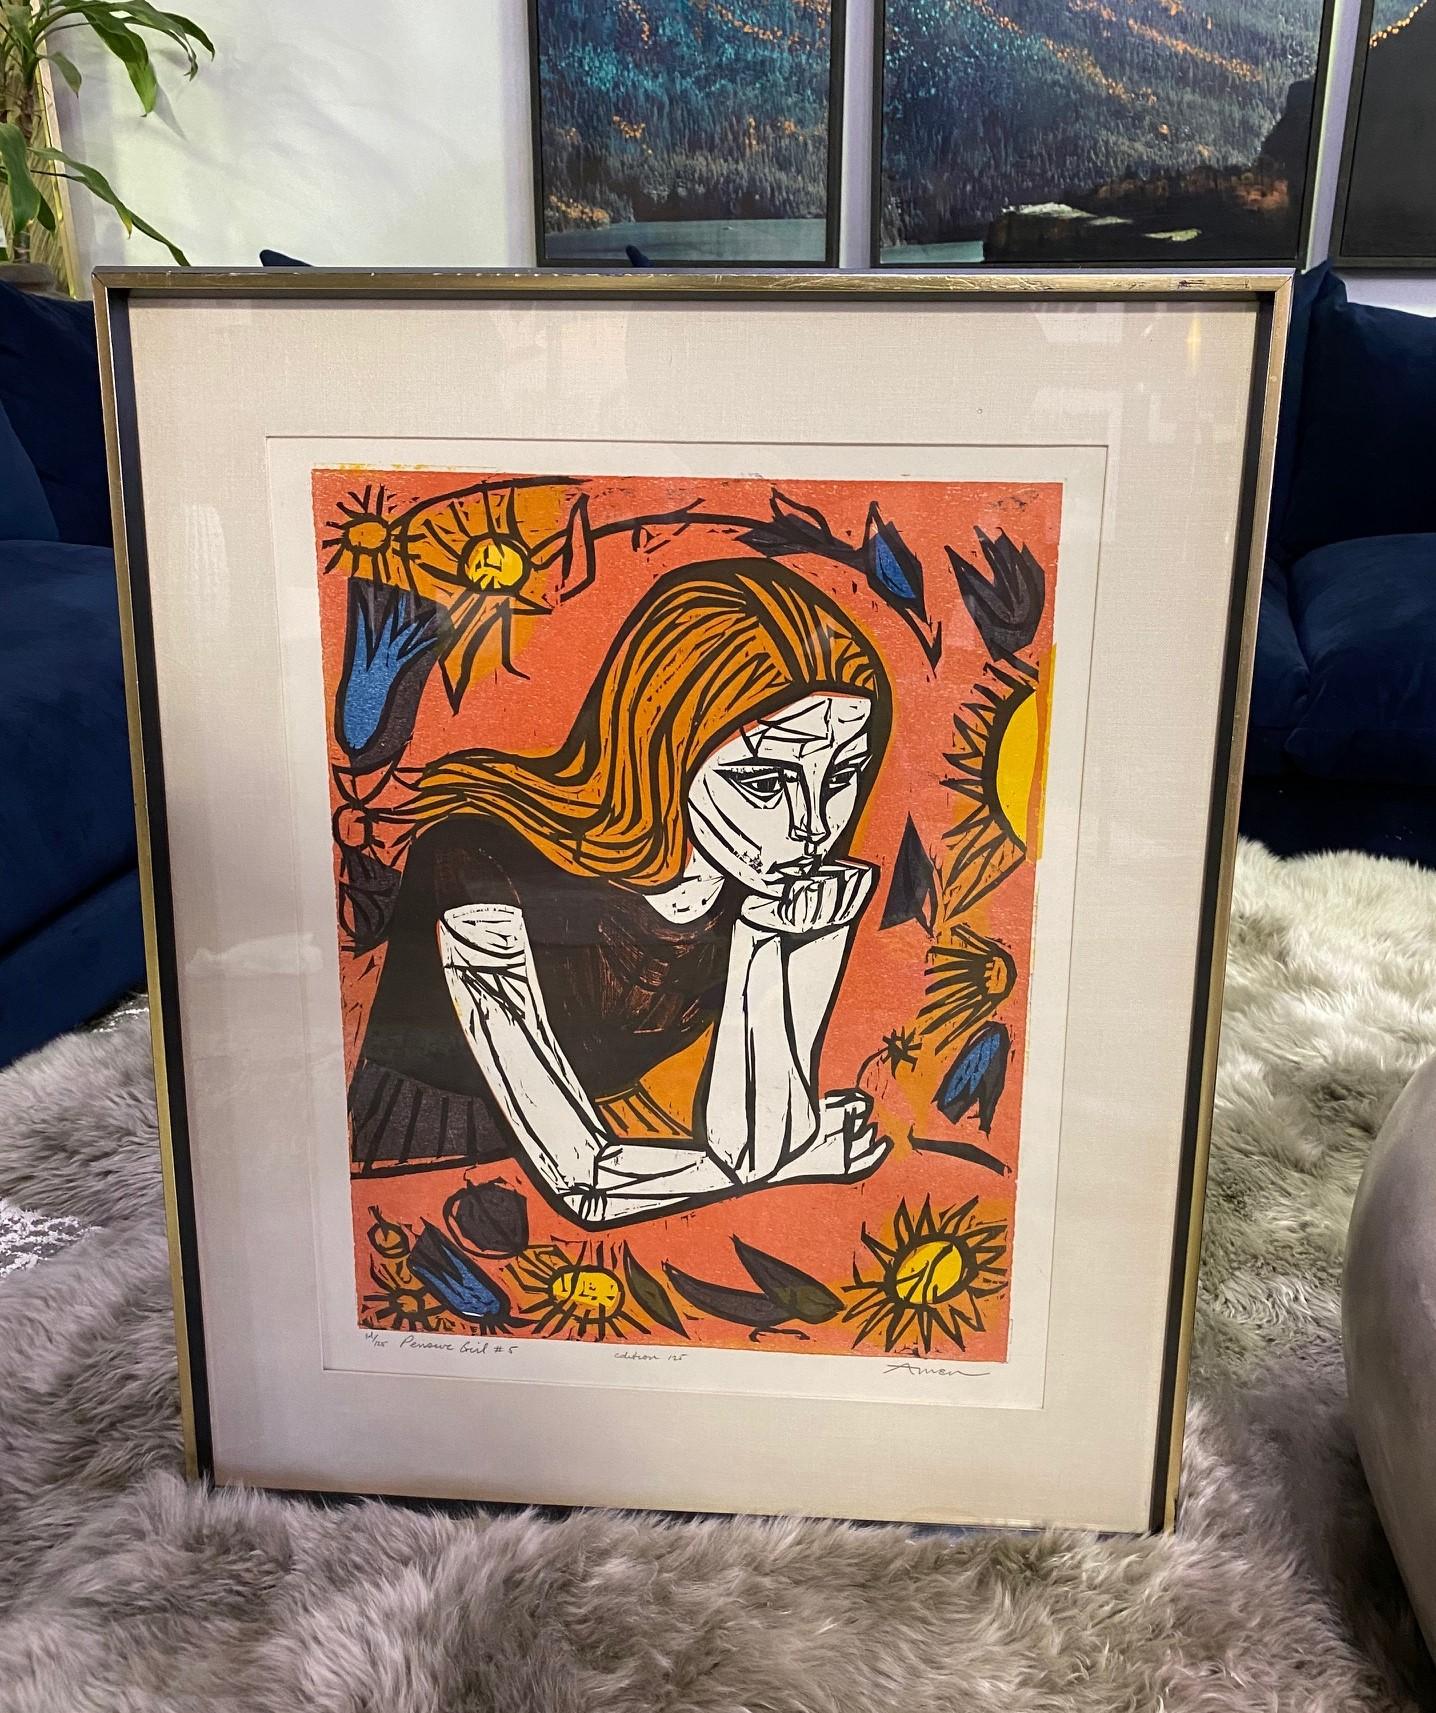 A wonderfully designed and richly colored woodcut image by New York City/ American born Jewish artist Irving Amen.

Pencil signed, titled (Pensive Girl #5), and numbered (from an edition of 125) by the artist.

Would be a great eye-catching work